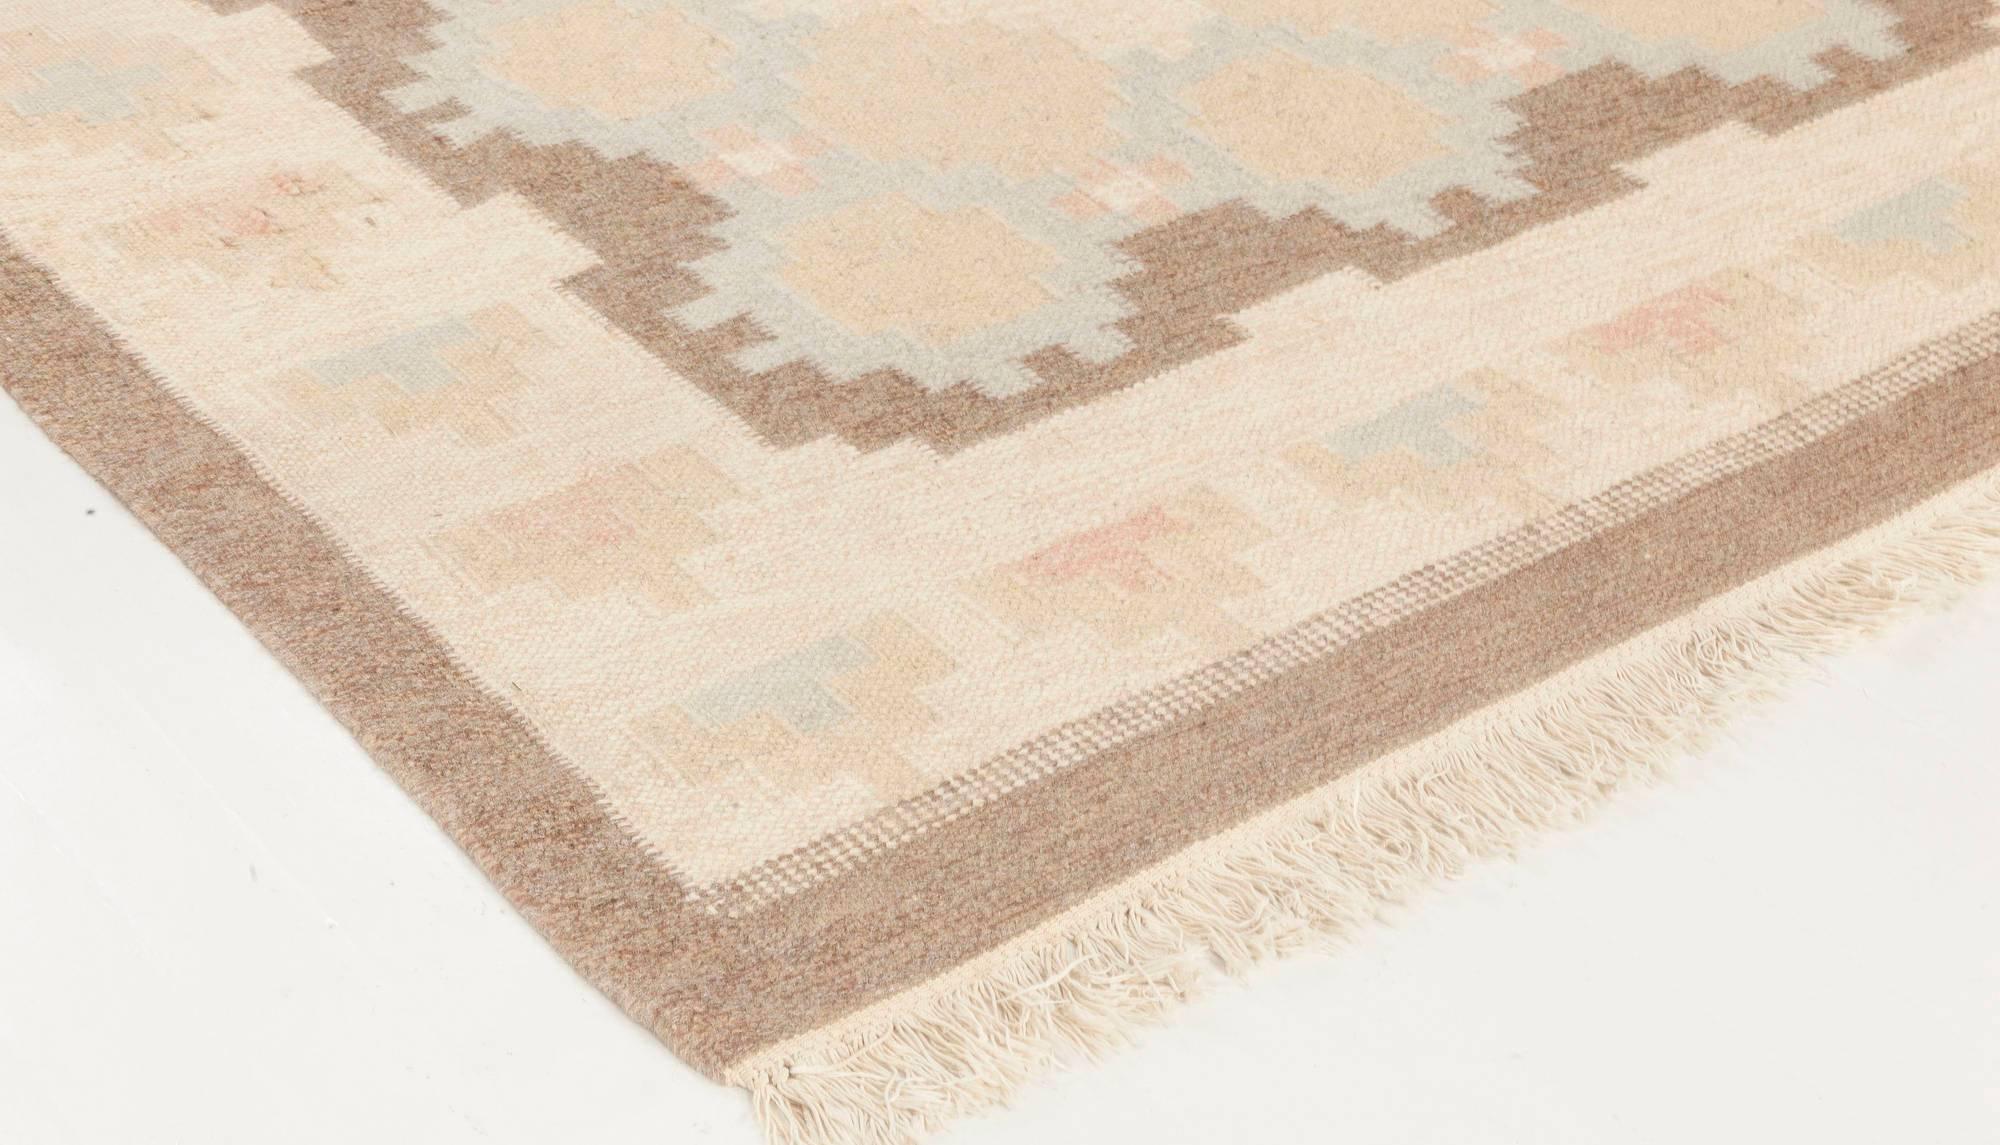 Hand-Knotted Doris Leslie Blau Collection Mid-20th Century Swedish Flat-Weave Wool Rug For Sale